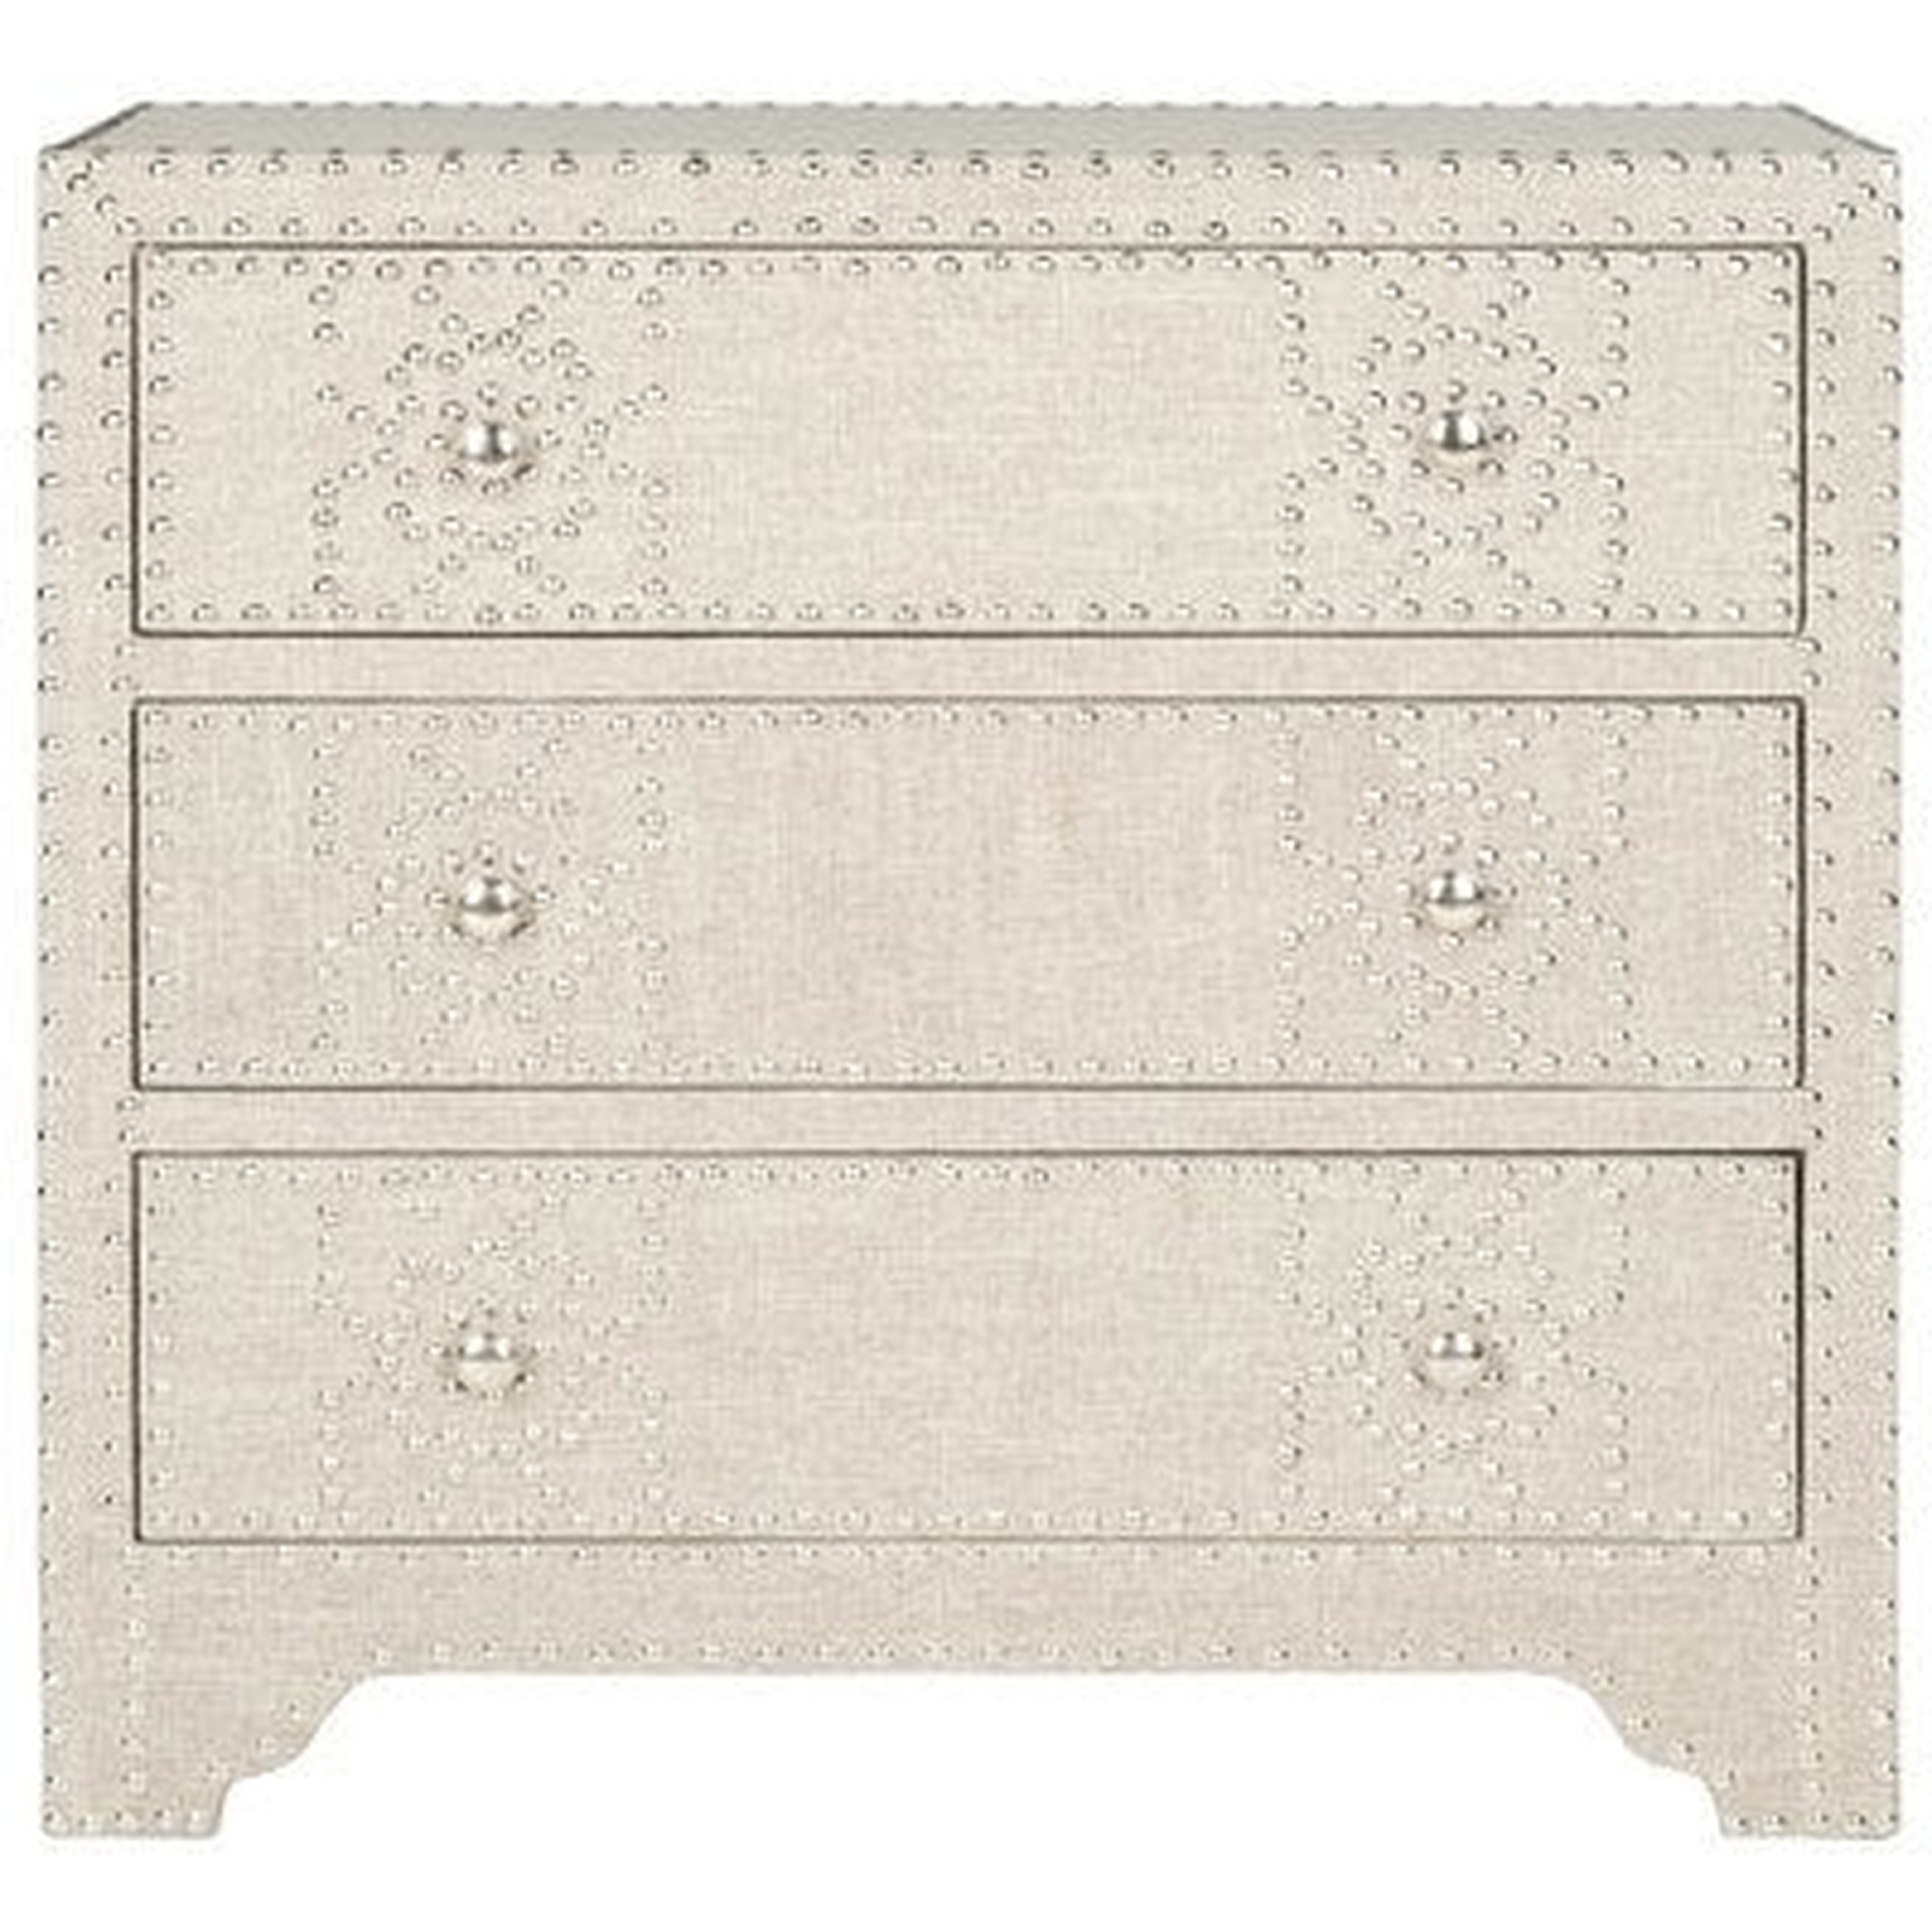 Gordy 3 Drawer Chest - Arlo Home